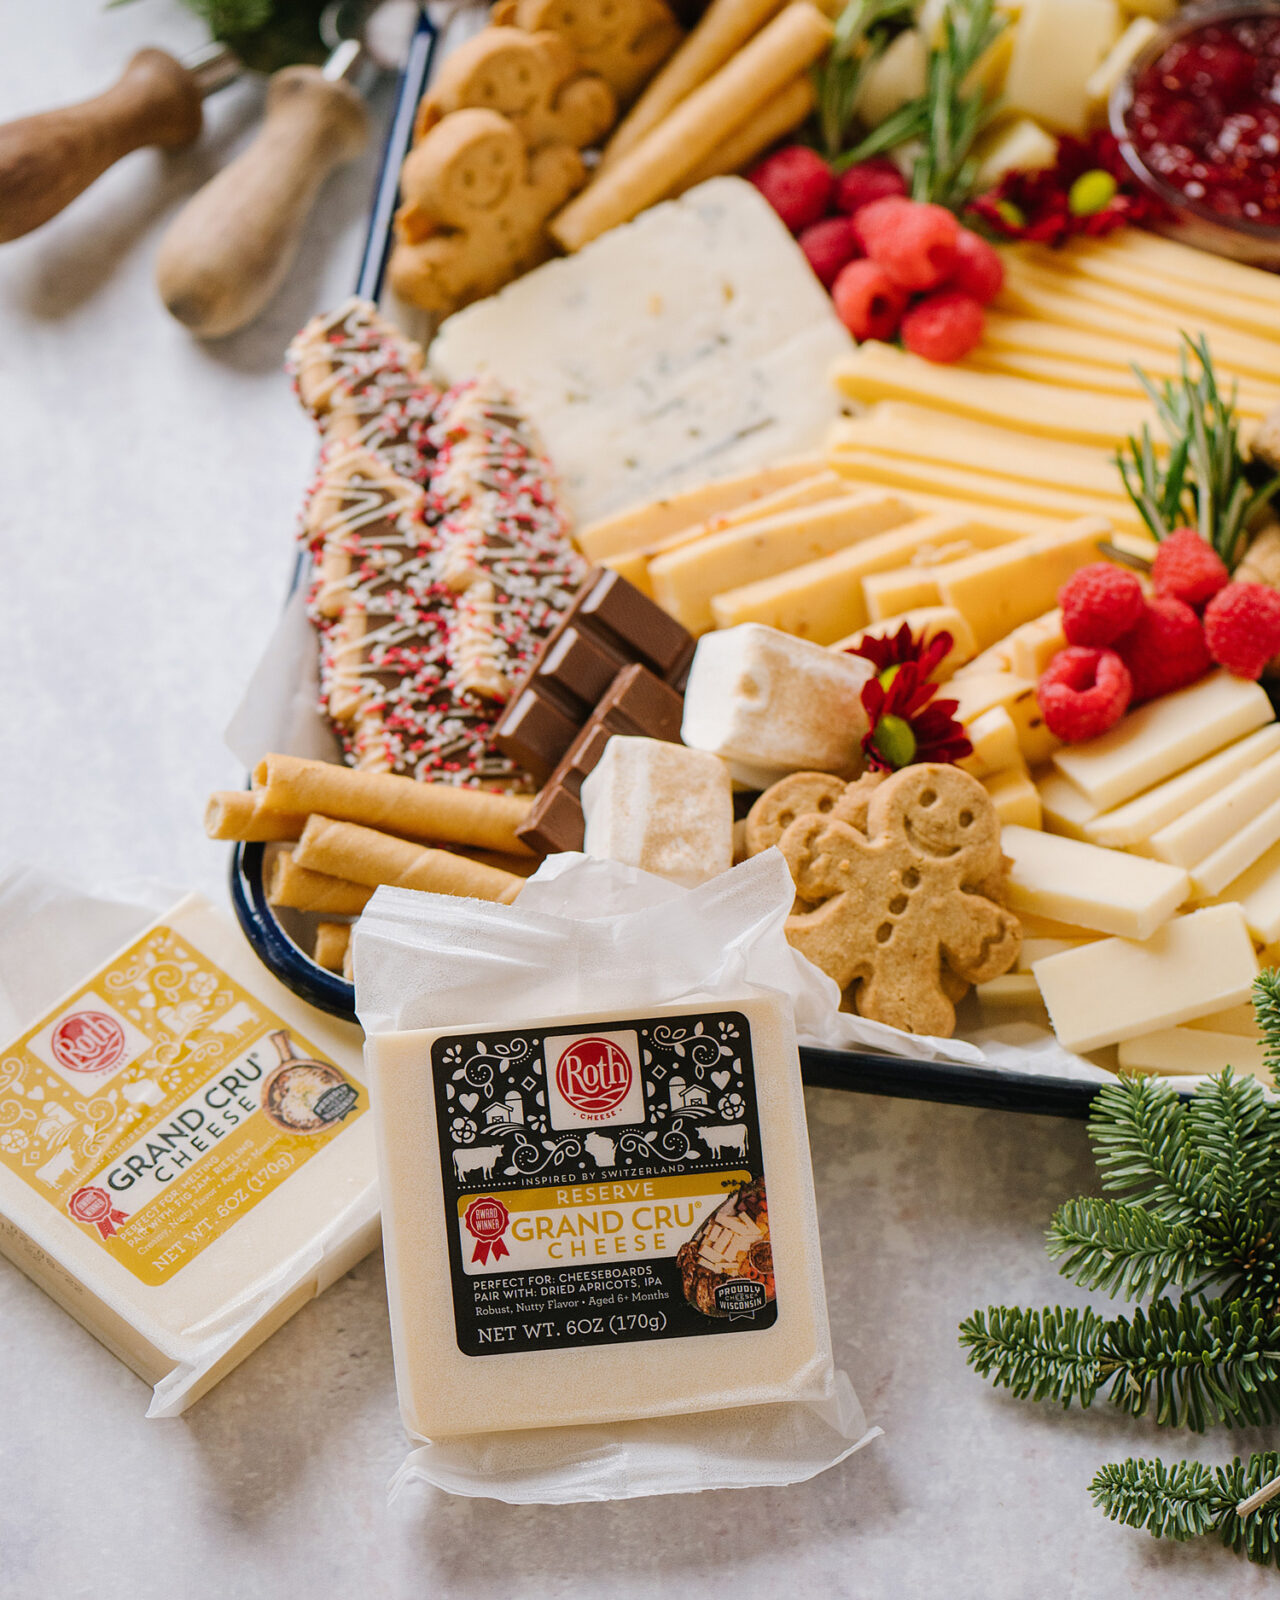 The Ultimate Guide to Holiday Entertaining with Cheese